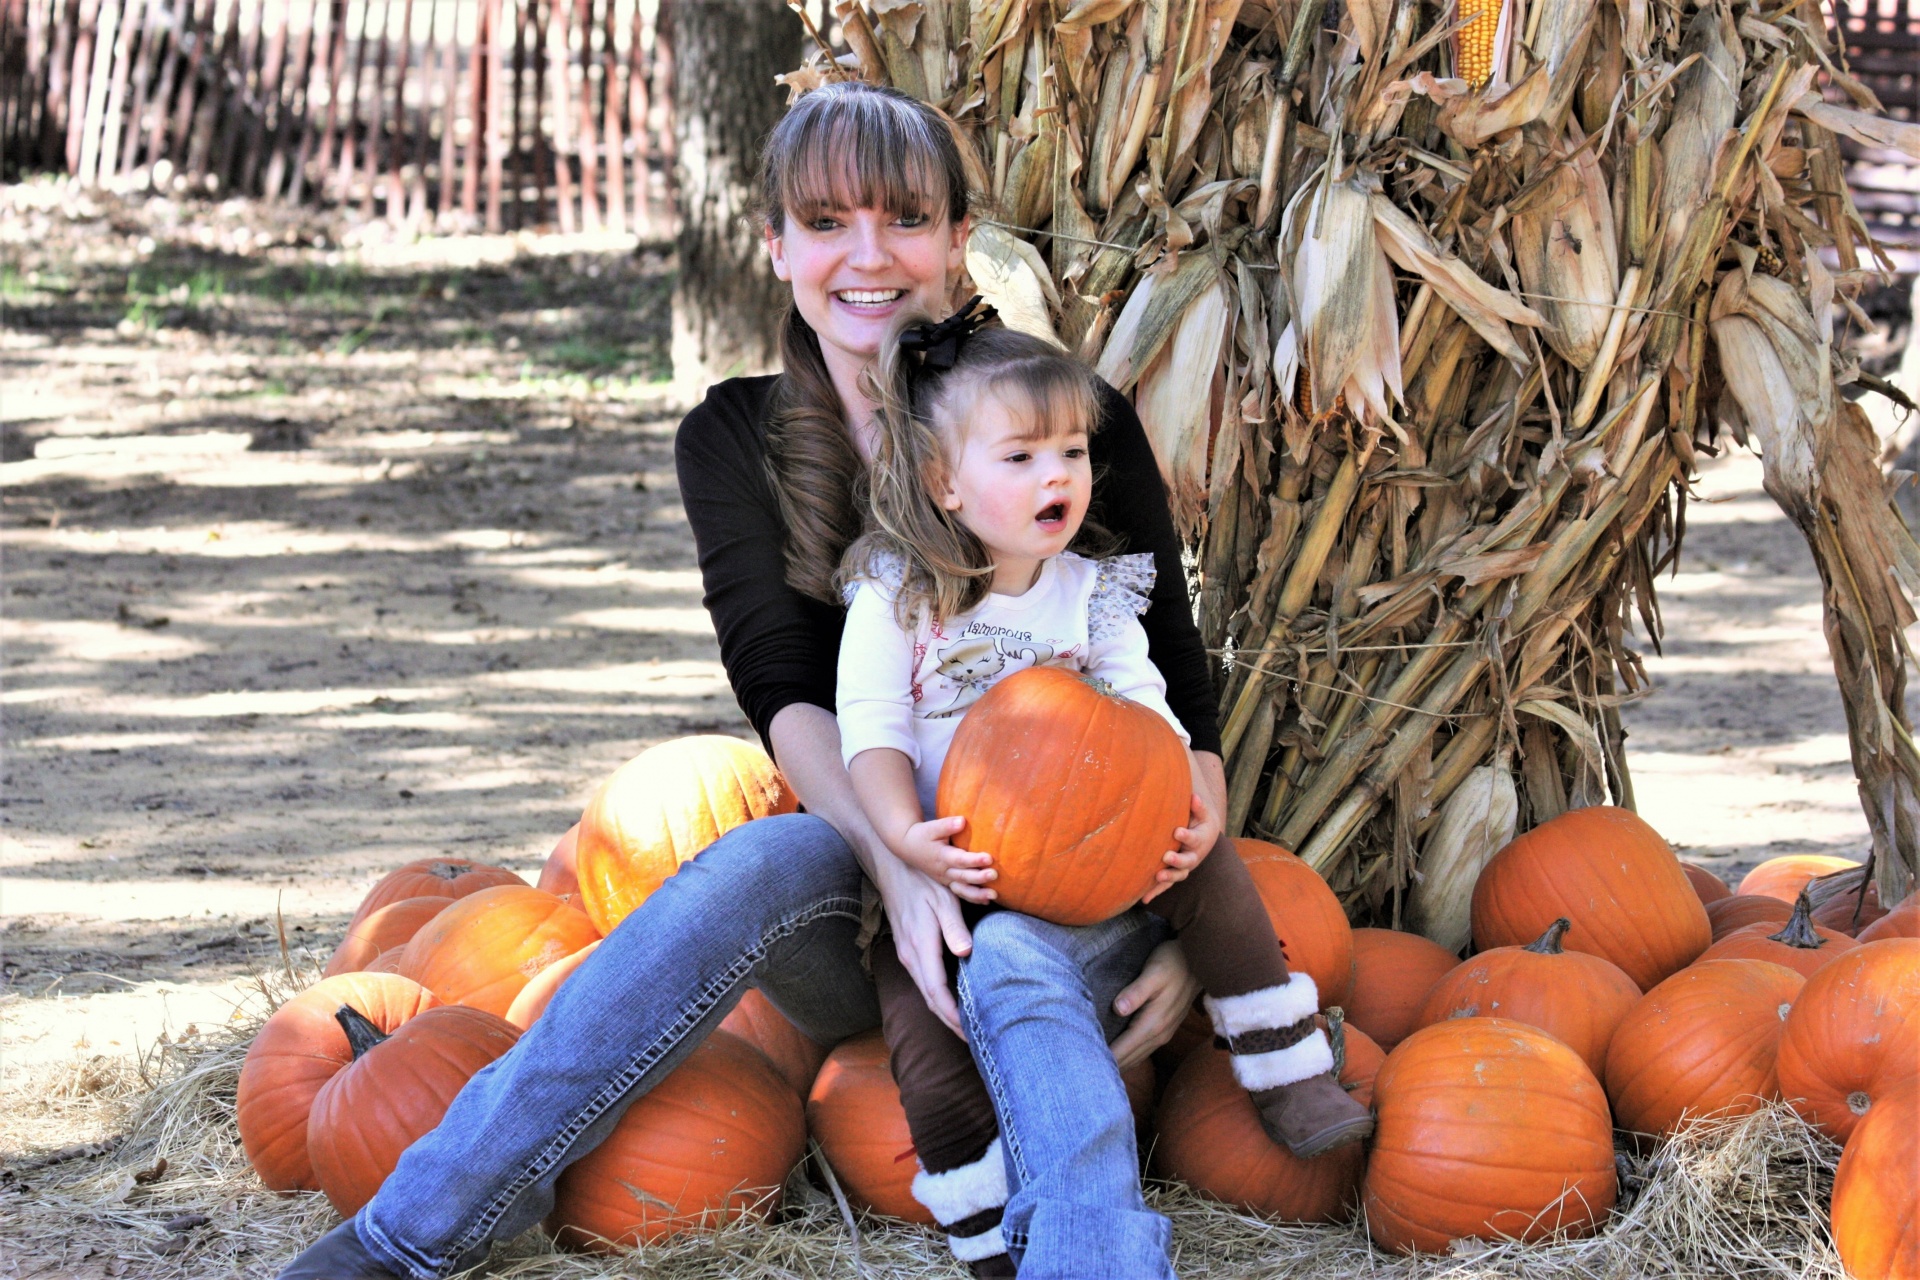 Mother And Child At Pumpkin Patch 2